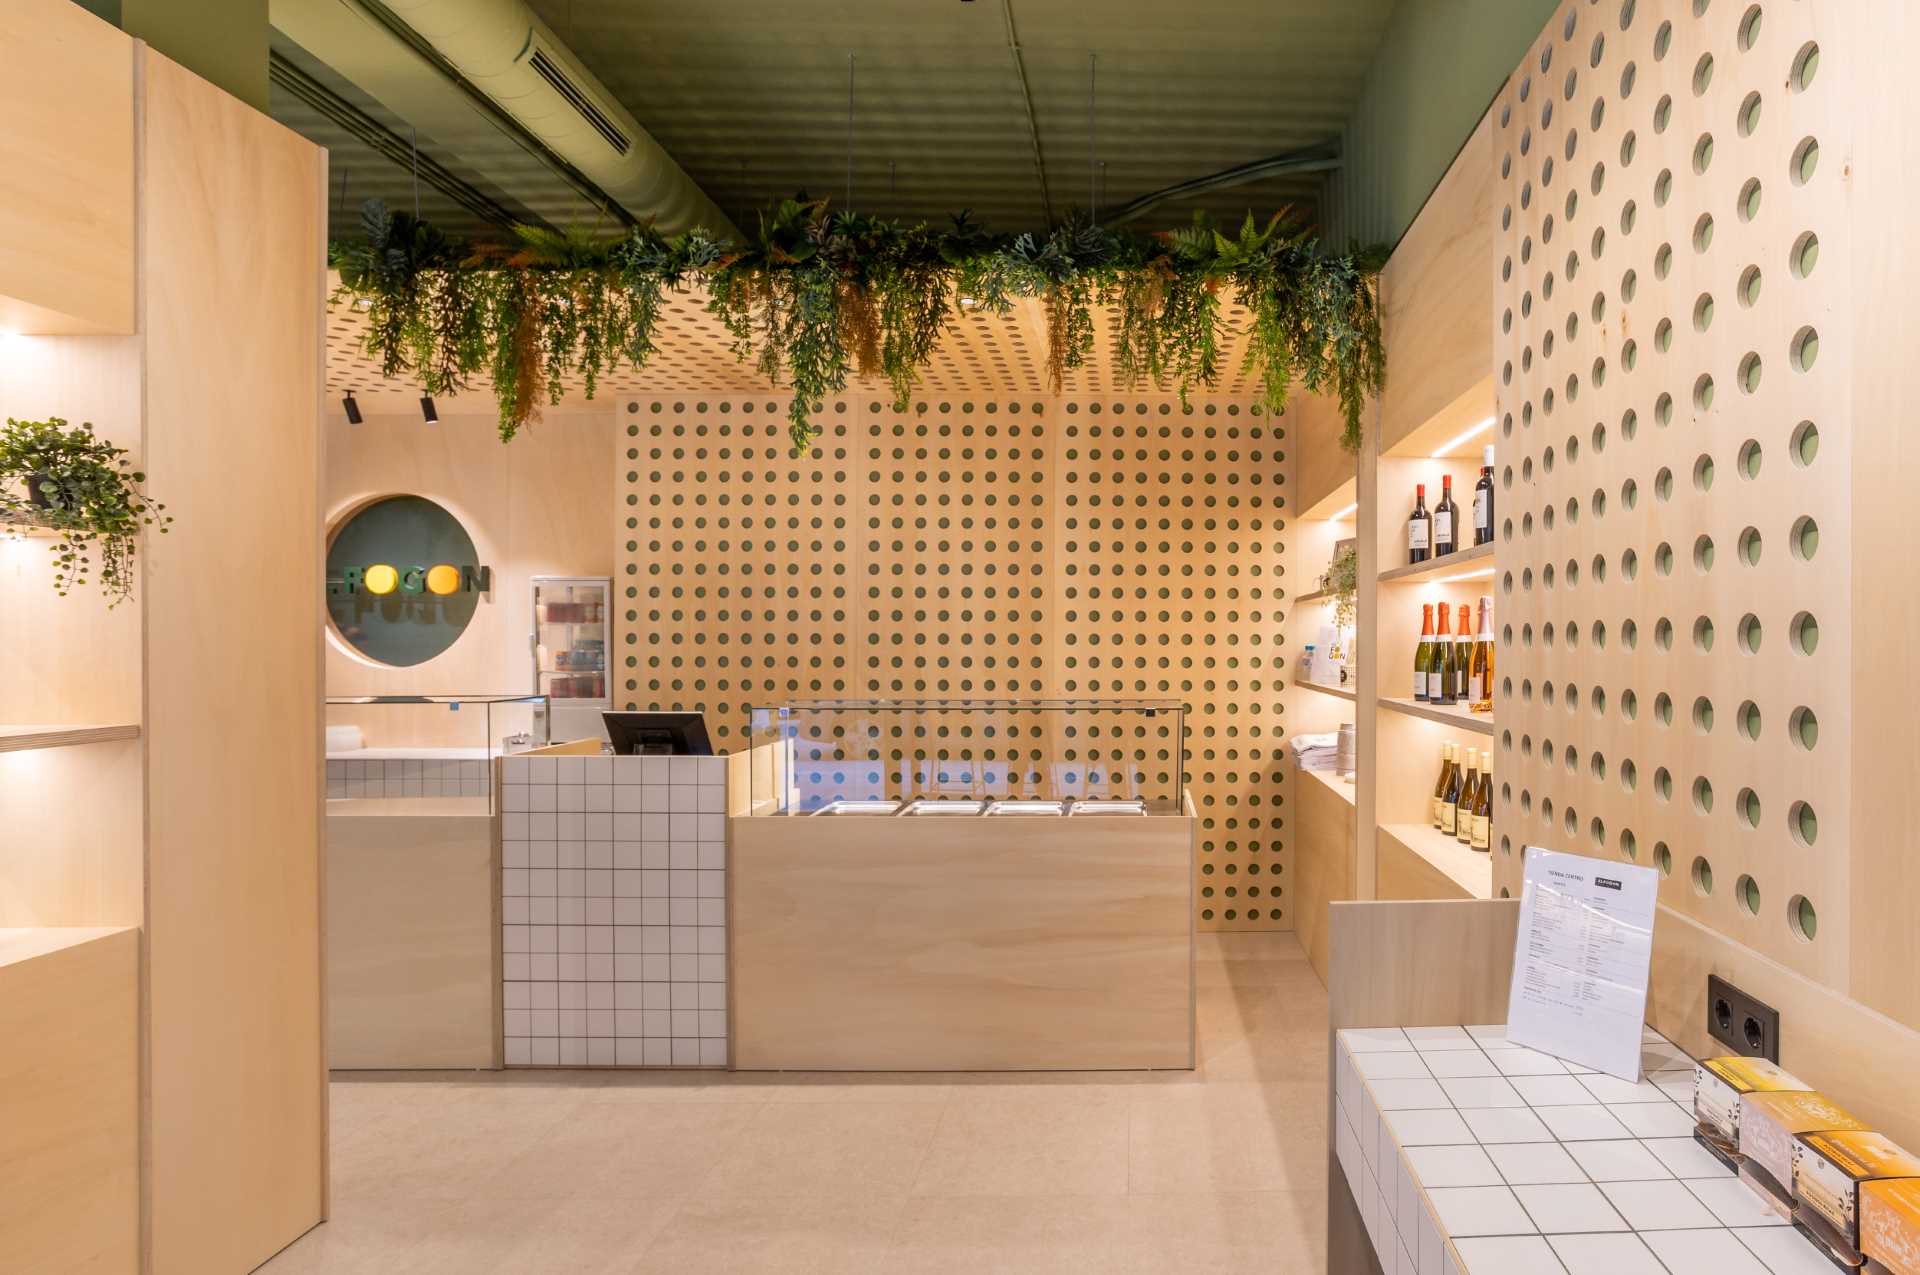 A modern takeaway shop with perforated wood panels, LED lighting, white square tiles, and plants.